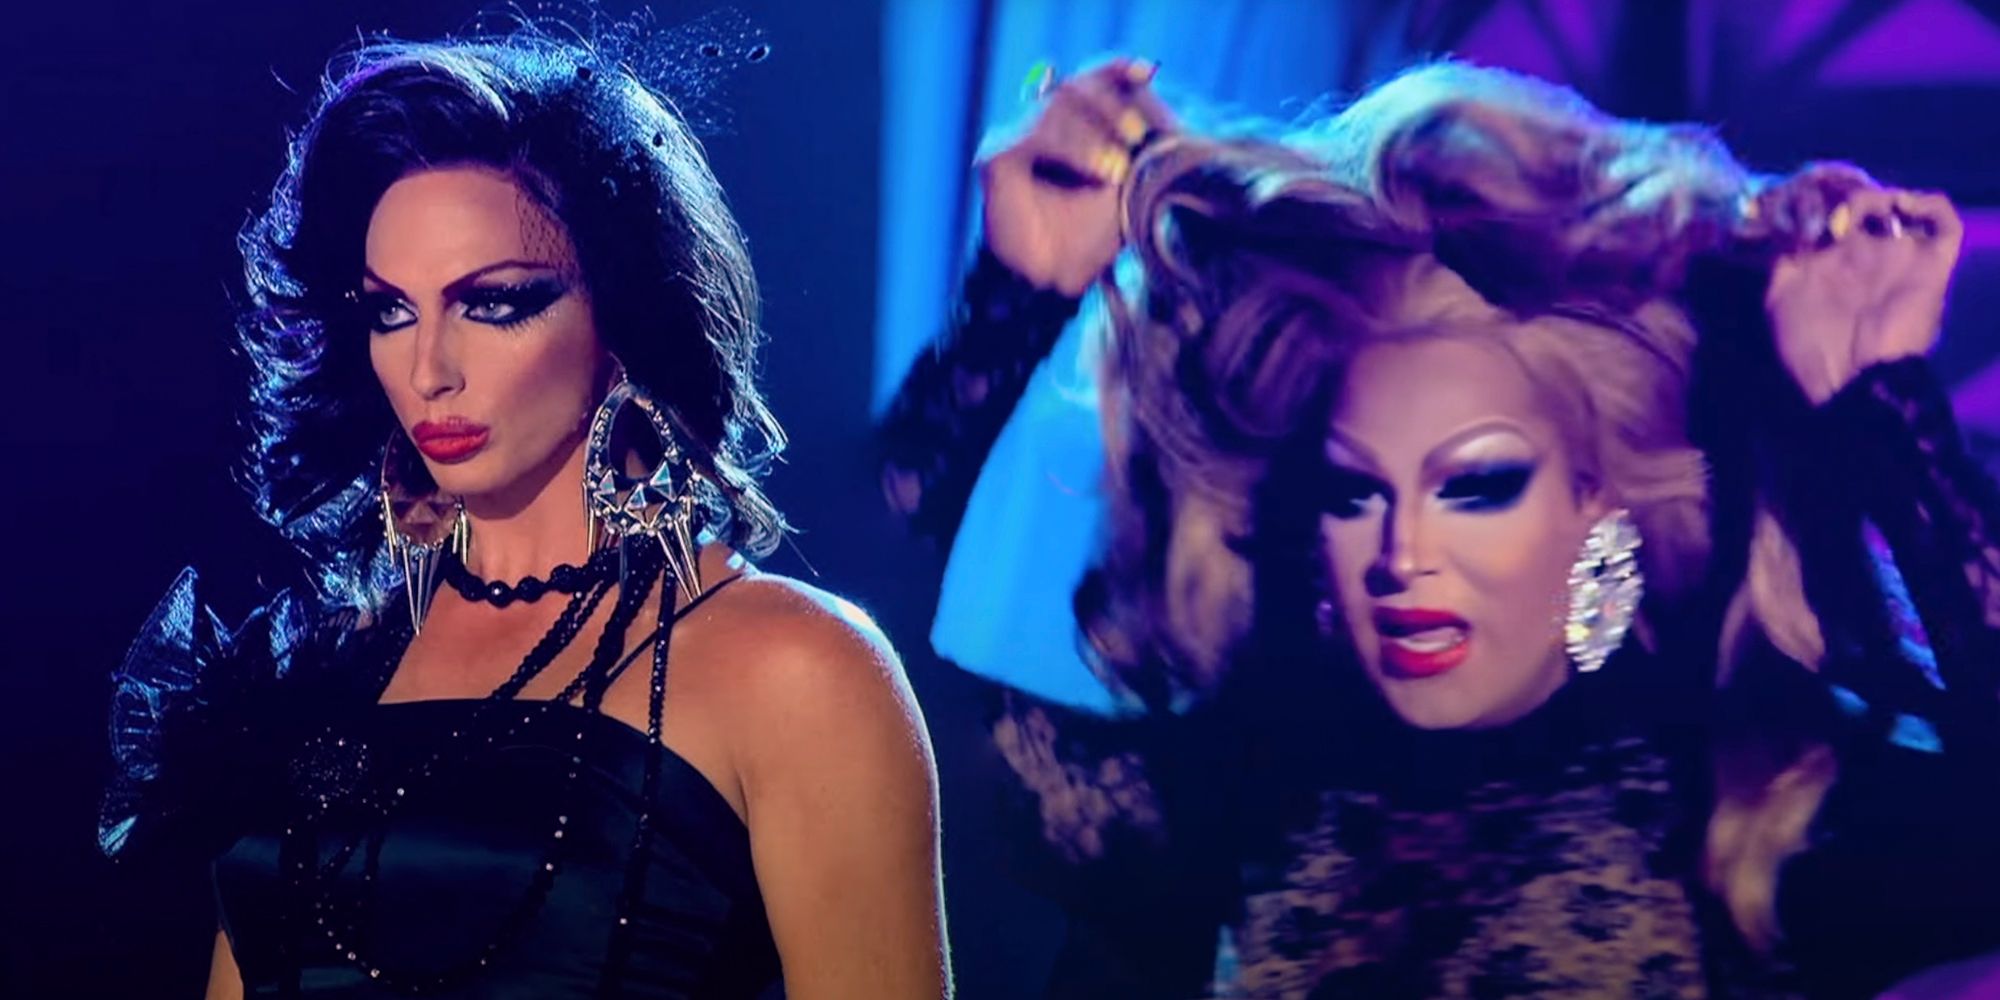 Roxxxy Andrews was the originator of the wig reveal, but Alyssa Edwards was equally fierce in this iconic lip sync battle